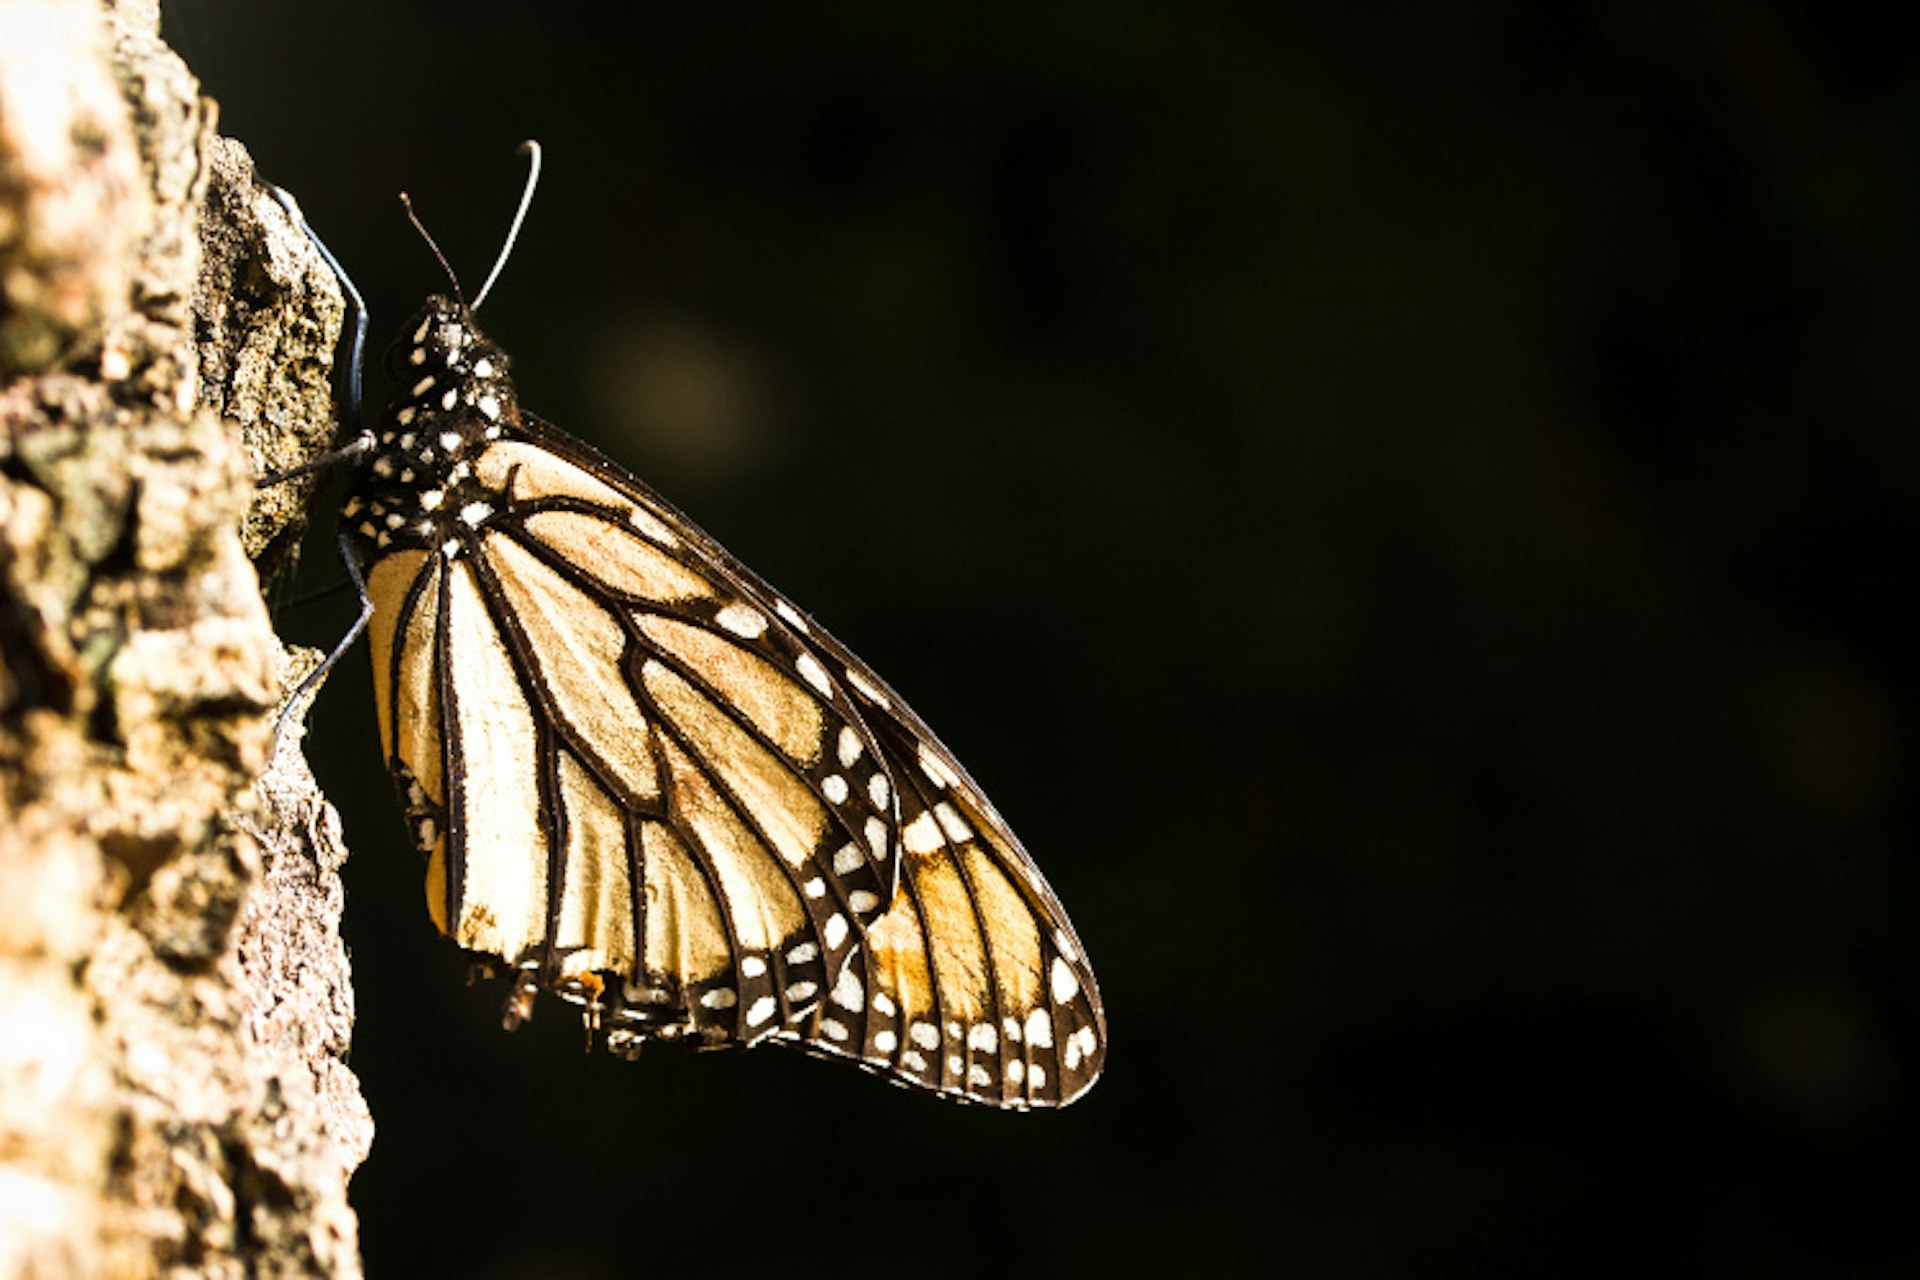 Delicate underwings of a monarch butterfly. Image by Stuart Butler / Lonely Planet